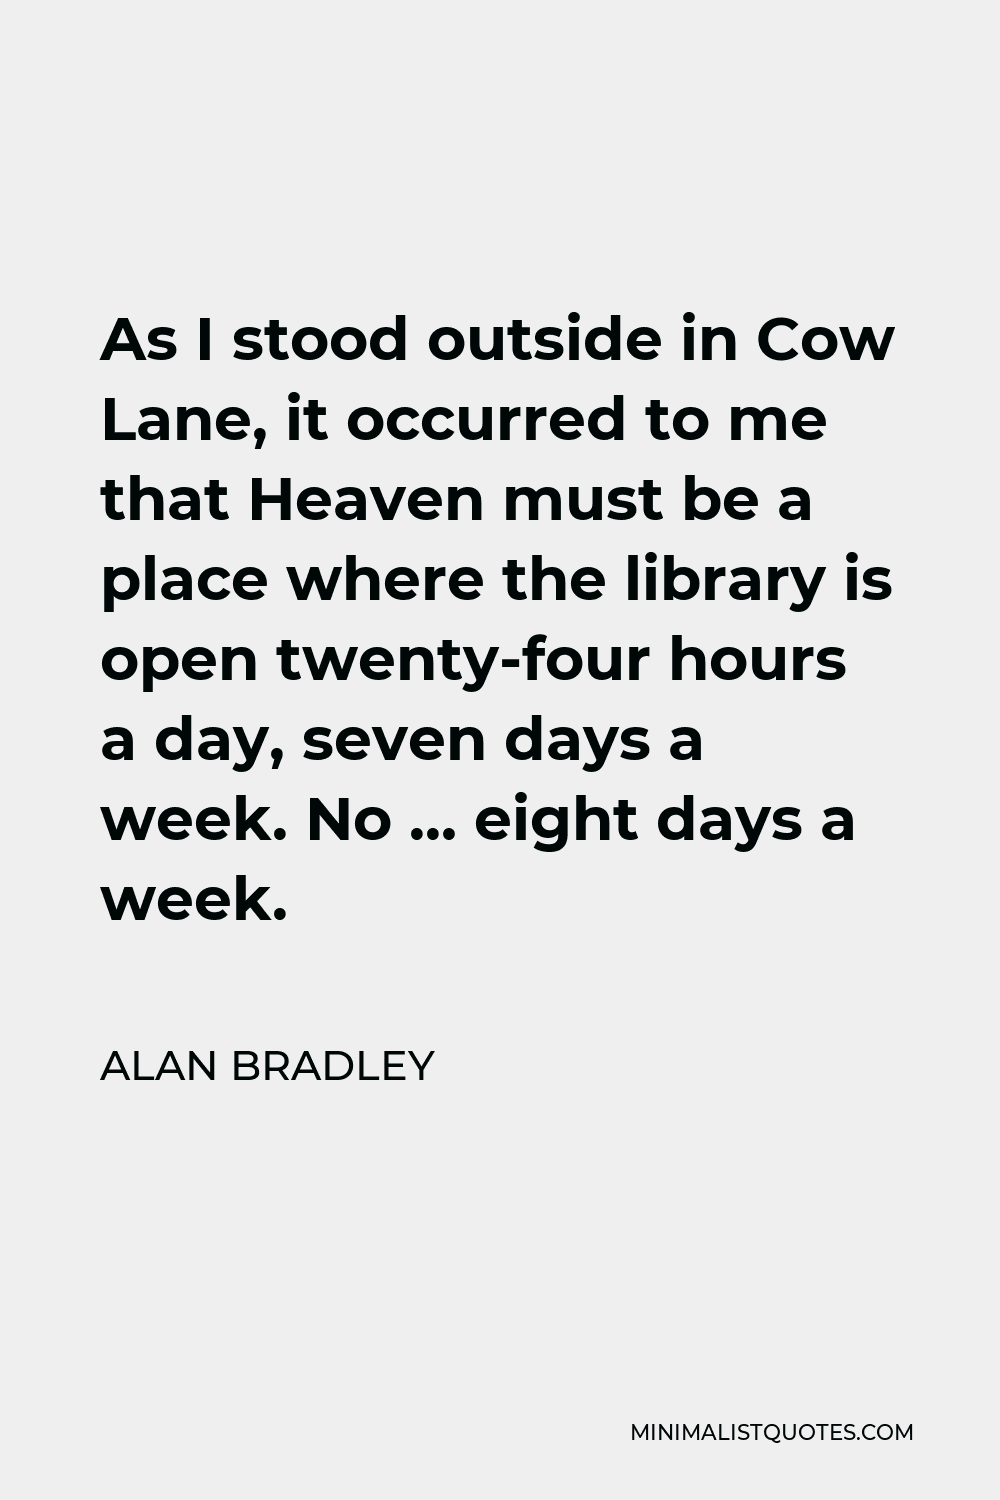 Alan Bradley Quote - As I stood outside in Cow Lane, it occurred to me that Heaven must be a place where the library is open twenty-four hours a day, seven days a week. No … eight days a week.